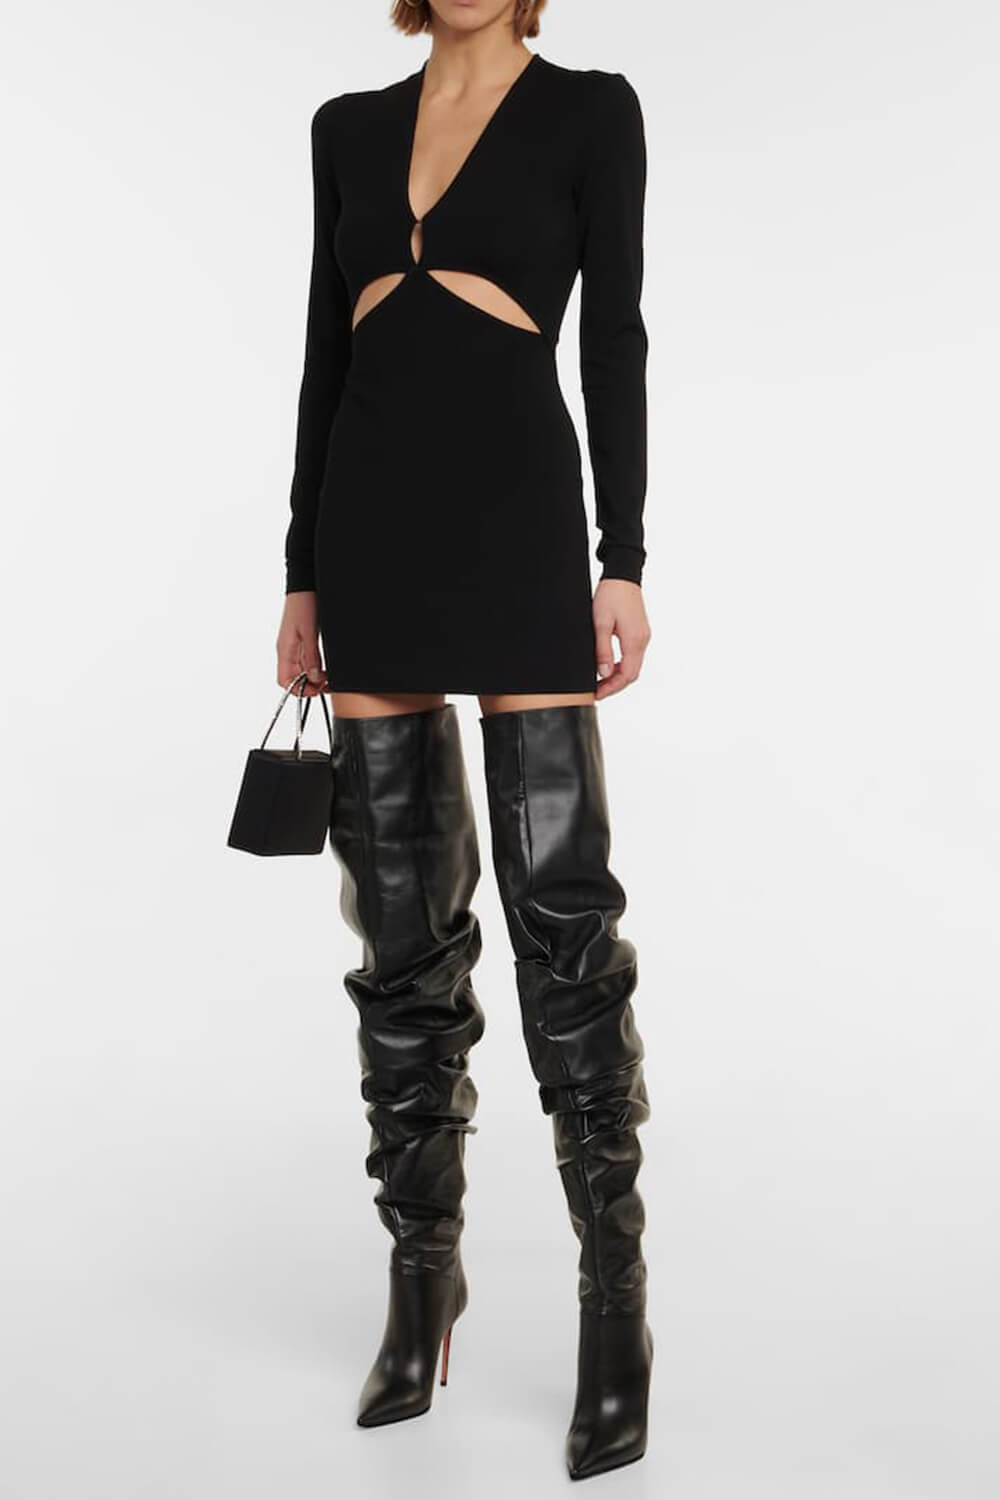 Ruched Over the Knee Boots